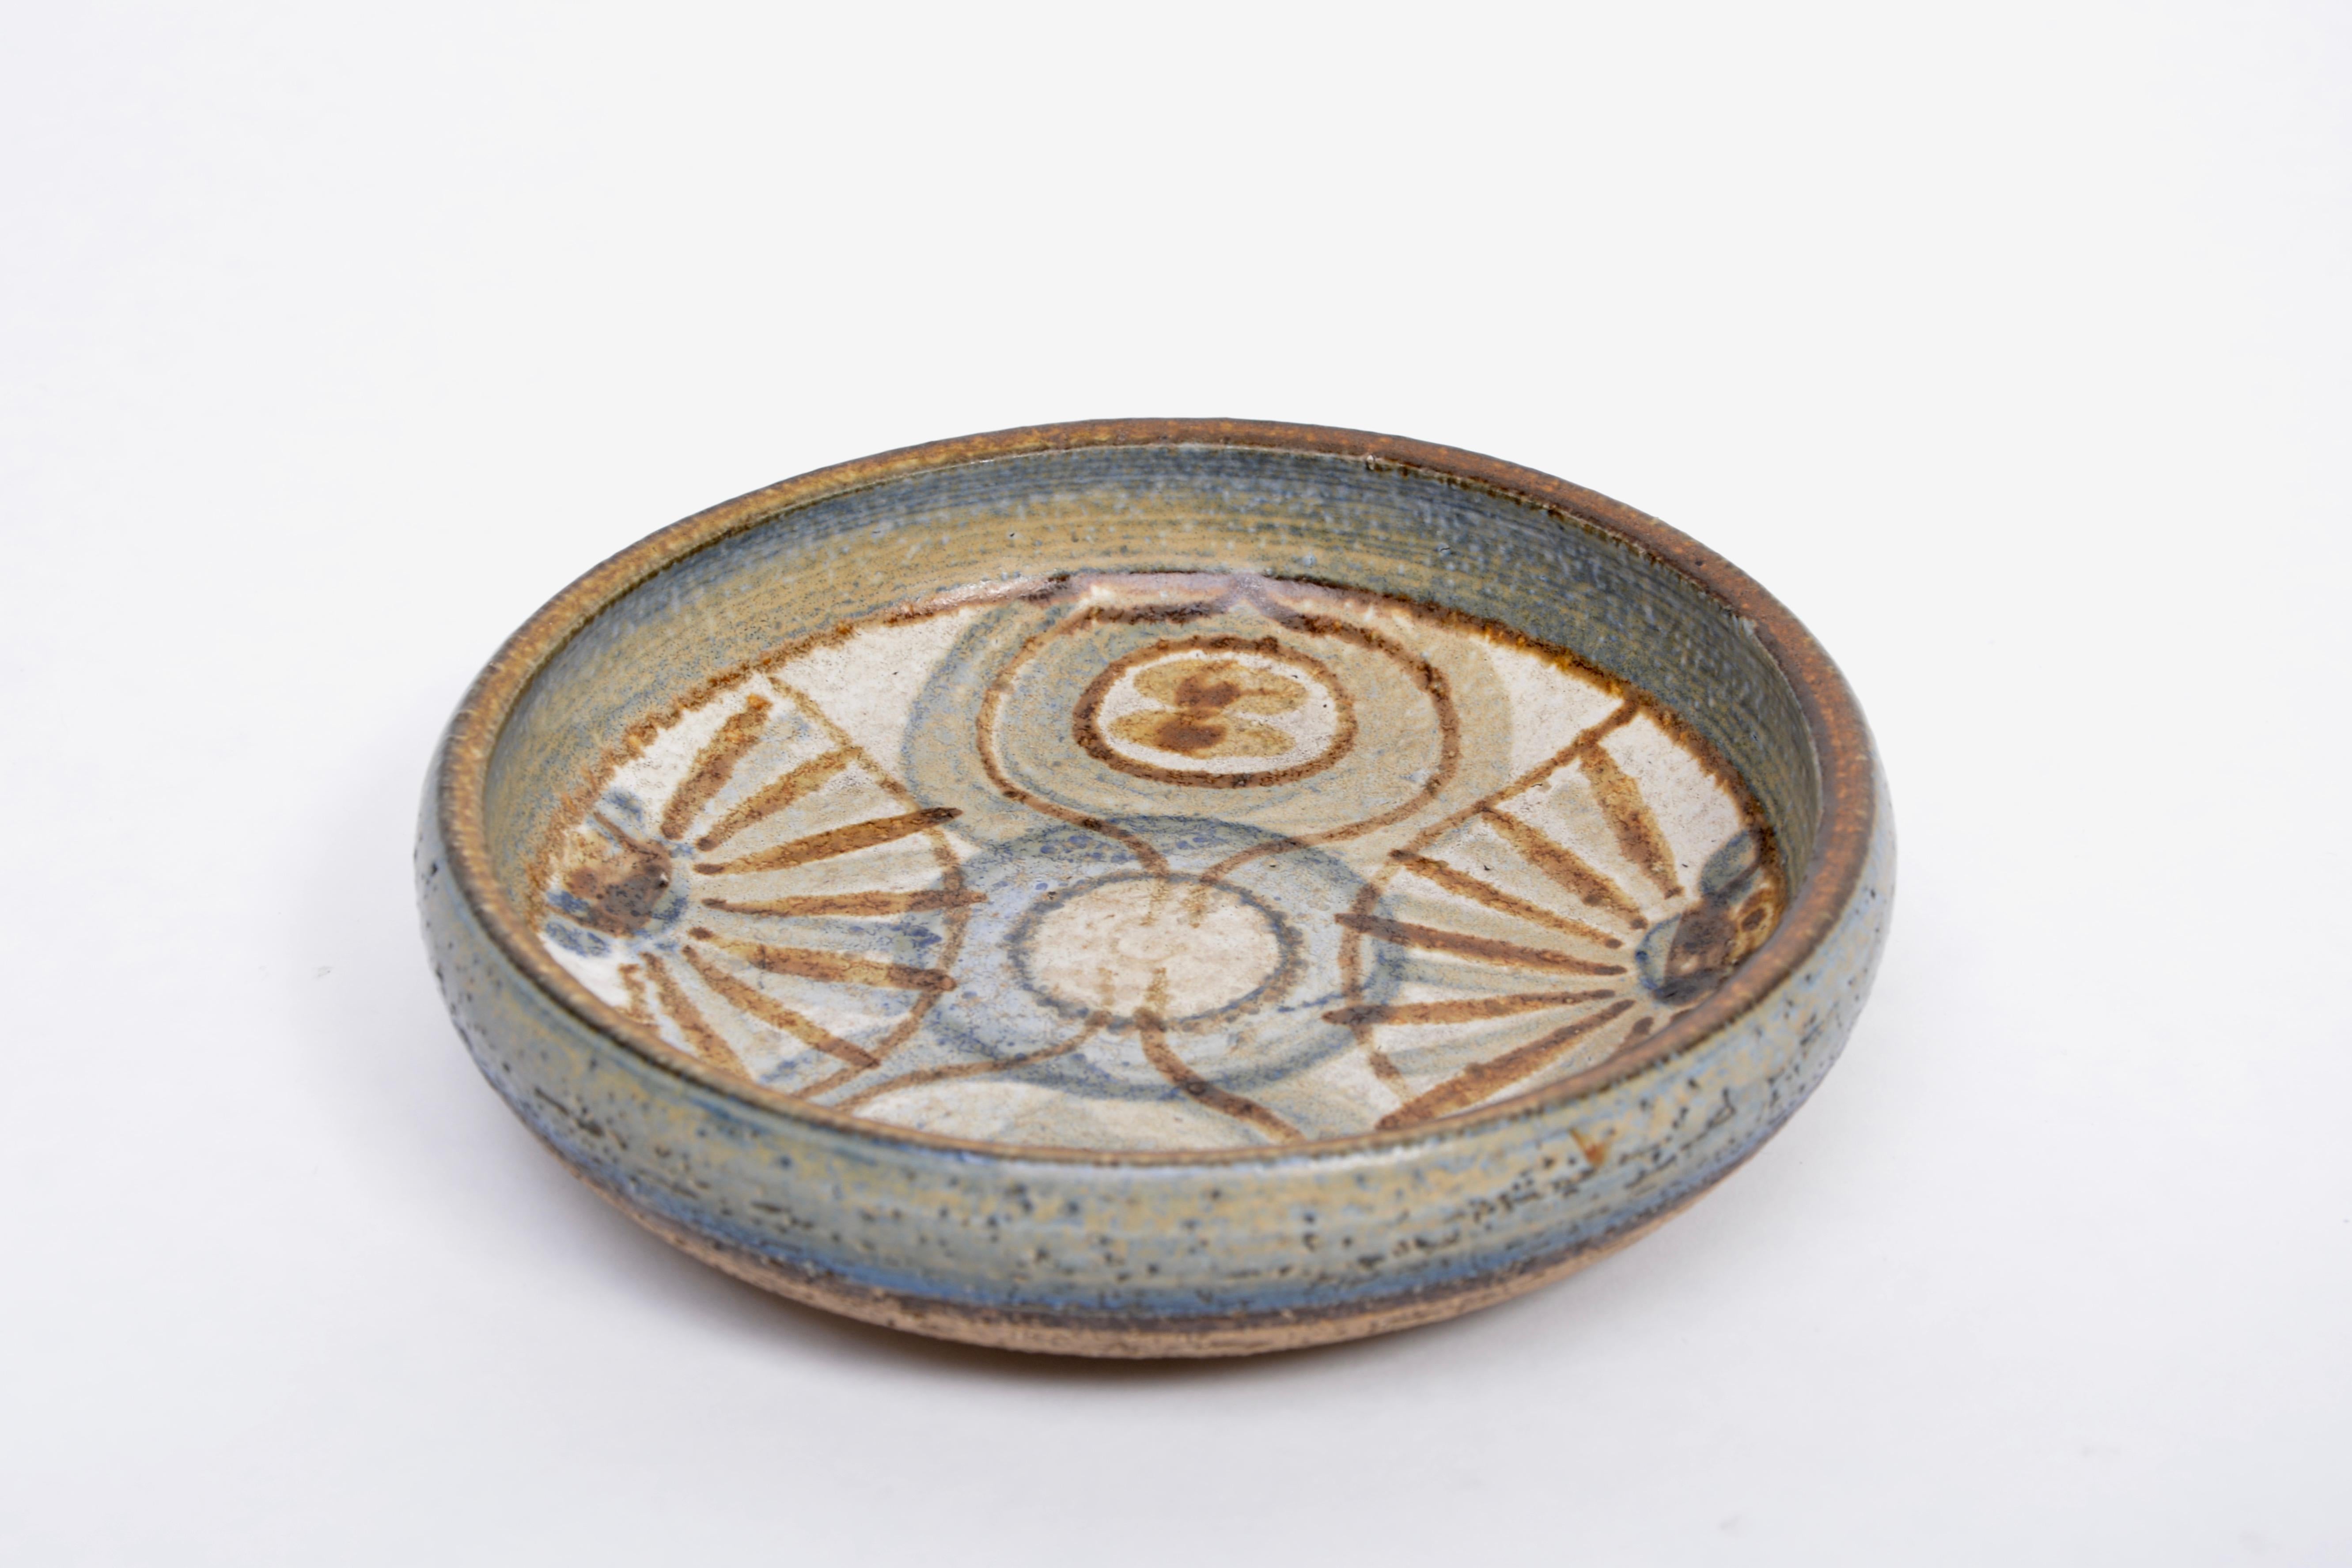 Small handmade ceramic bowl or plate designed by Noomi Bakchausen in 1971, and produced by Soholm Stentoj in Denmark, in the 1970s.